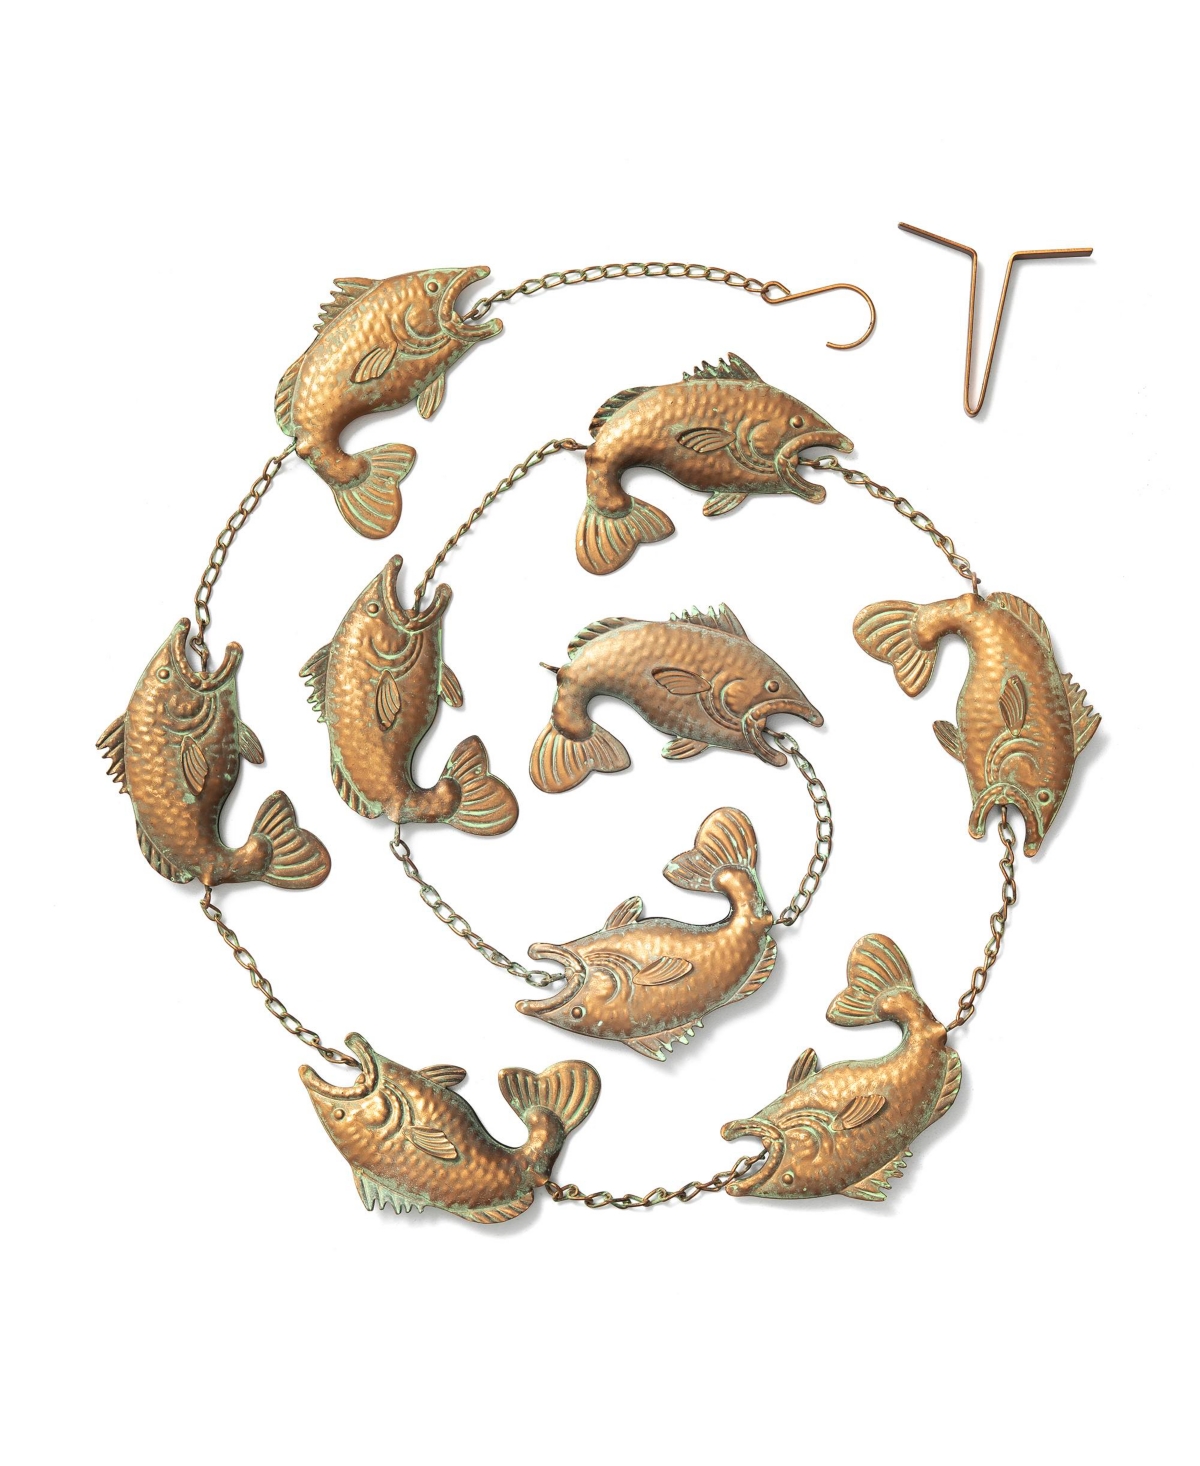 Glitzhome 8.5' Faux Copper Patina Finish Fish Shaped Rain Chain With V-shaped Gutter Clip In Gold